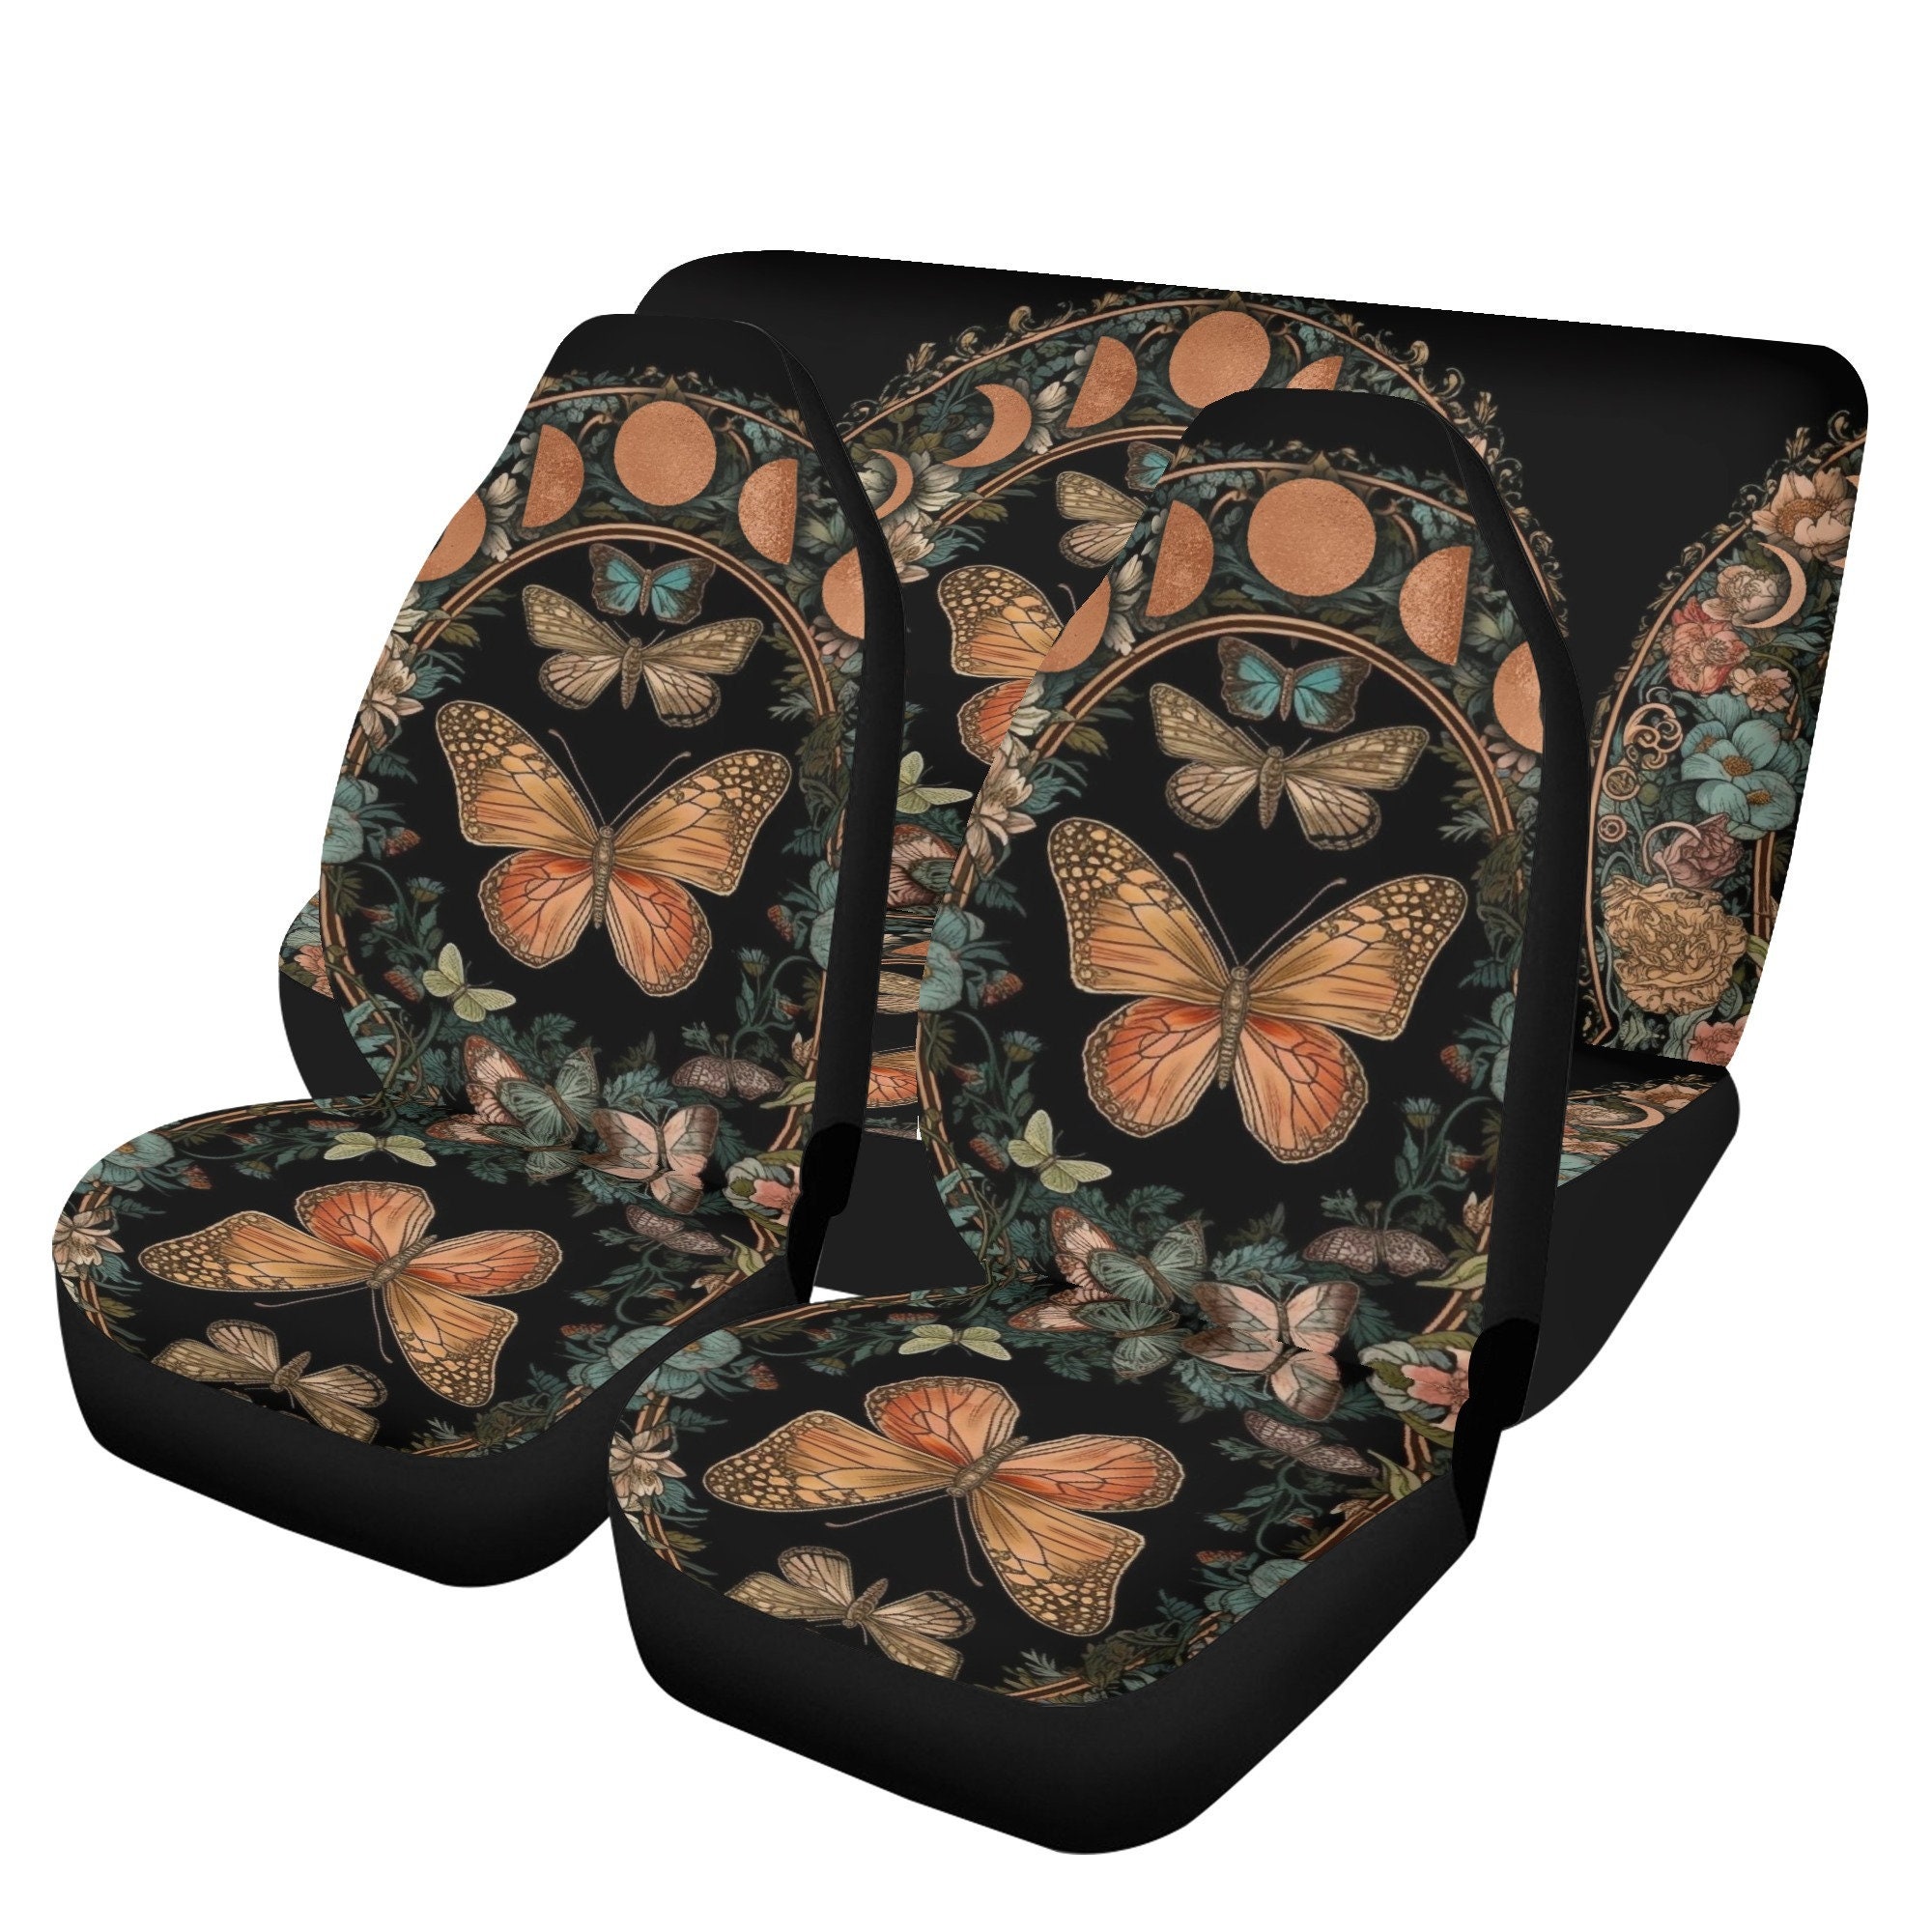 Discover Boho red moon wildflower daisy moth Car Seat Cover Set, Witchy gypsy, Whimsical Car interior decor, car accessories